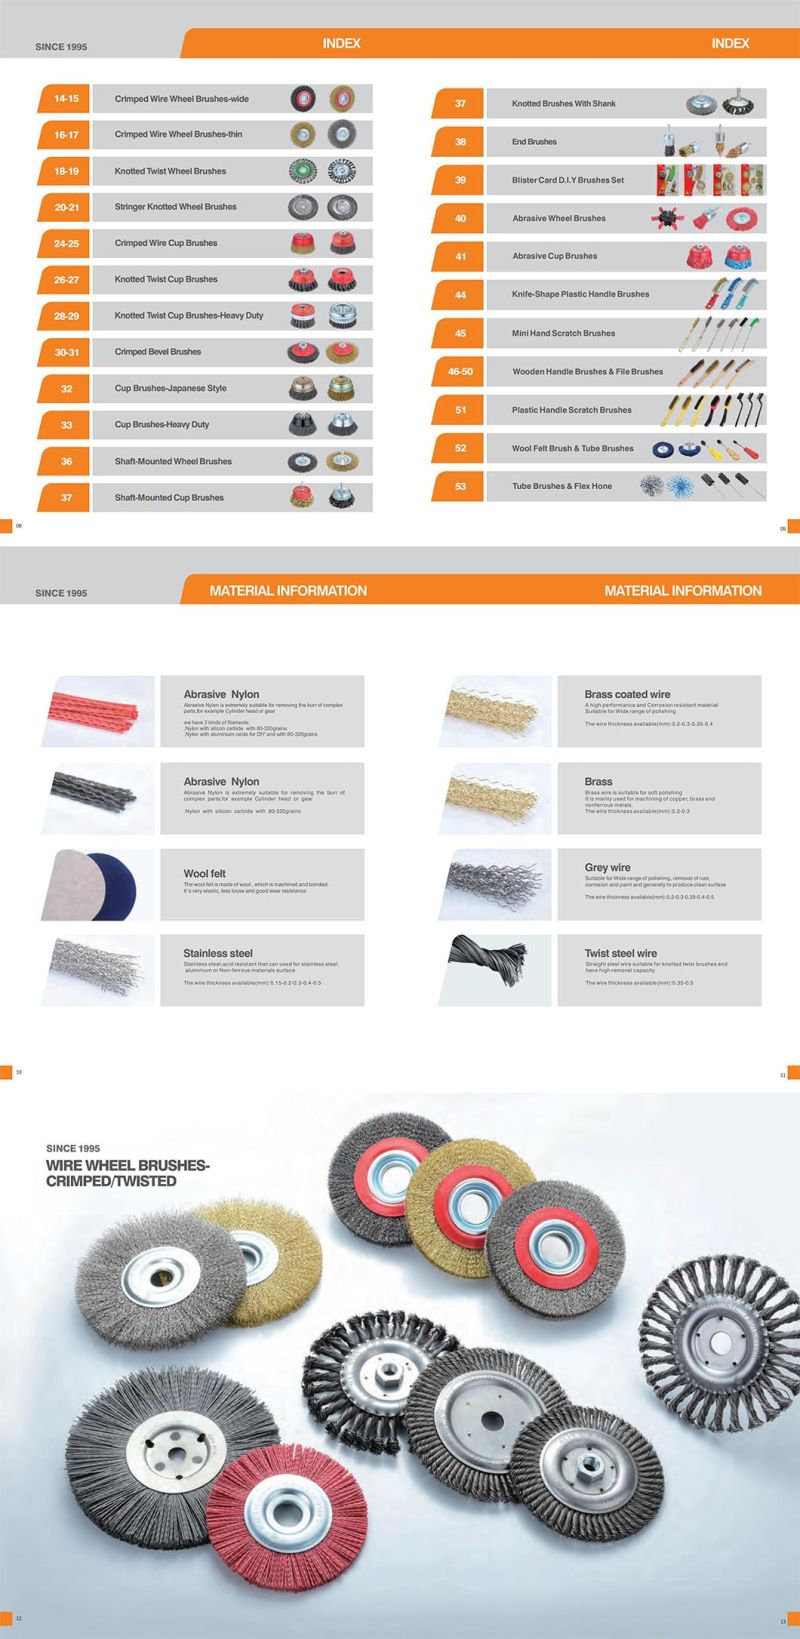 Knotted/Crimped Cup/Wheel Bevel/Shaft-Mounted/Wooden/Plastic Handle Wire Brushes for Angle Grinder